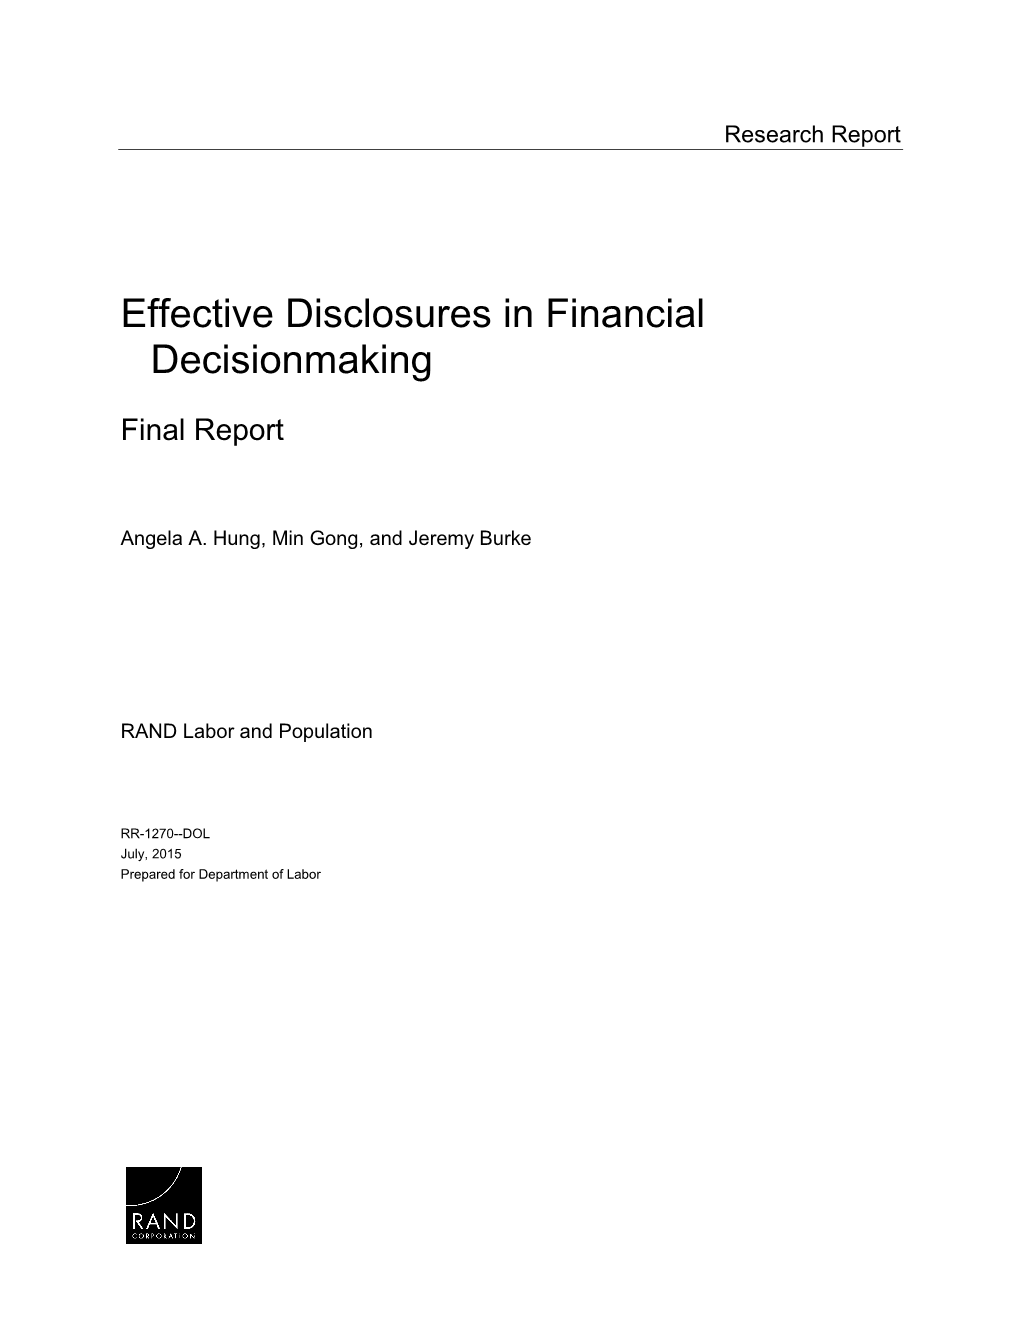 Effective Disclosures in Financial Decisionmaking